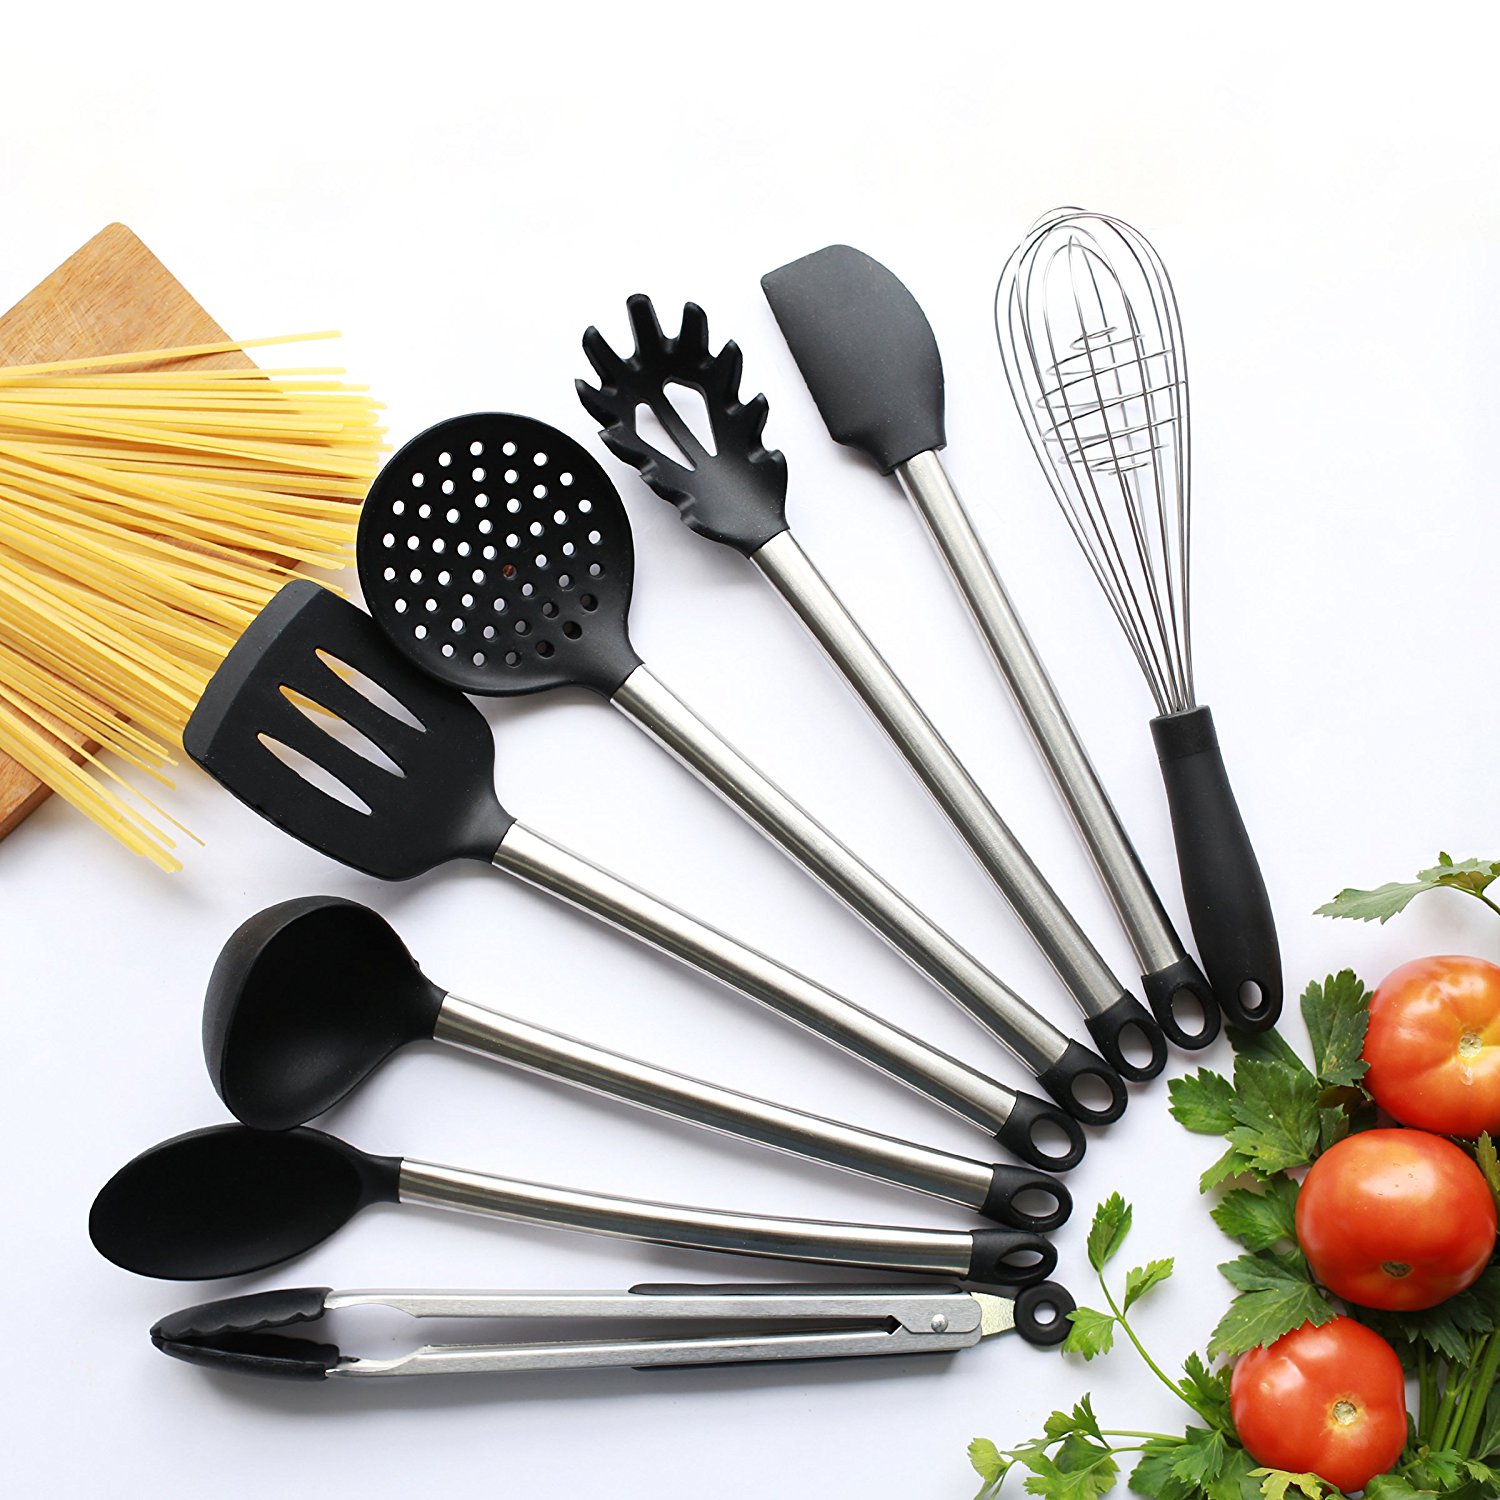 Top 10 Stainless Kitchen Cooking Utensil Set in 2019 Professional Pe